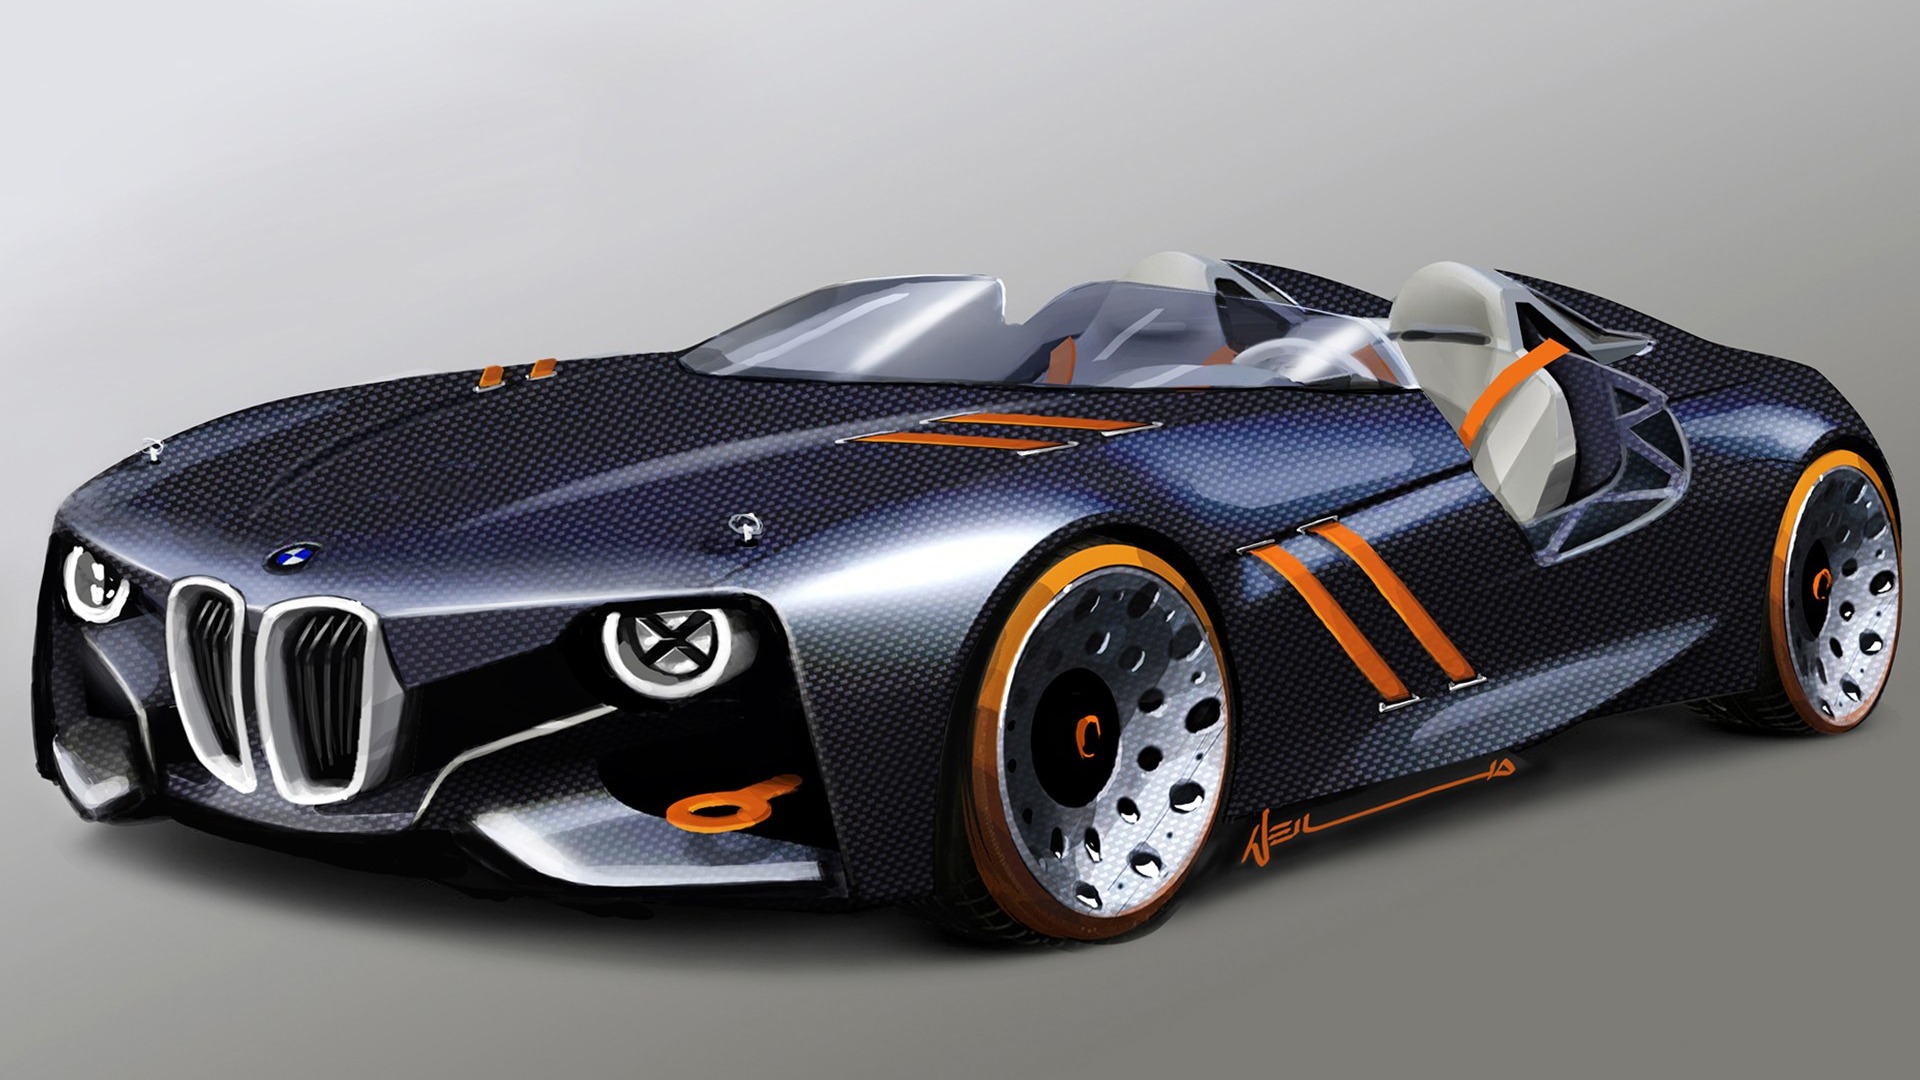 Special edition of concept cars wallpaper (23) #1 - 1920x1080